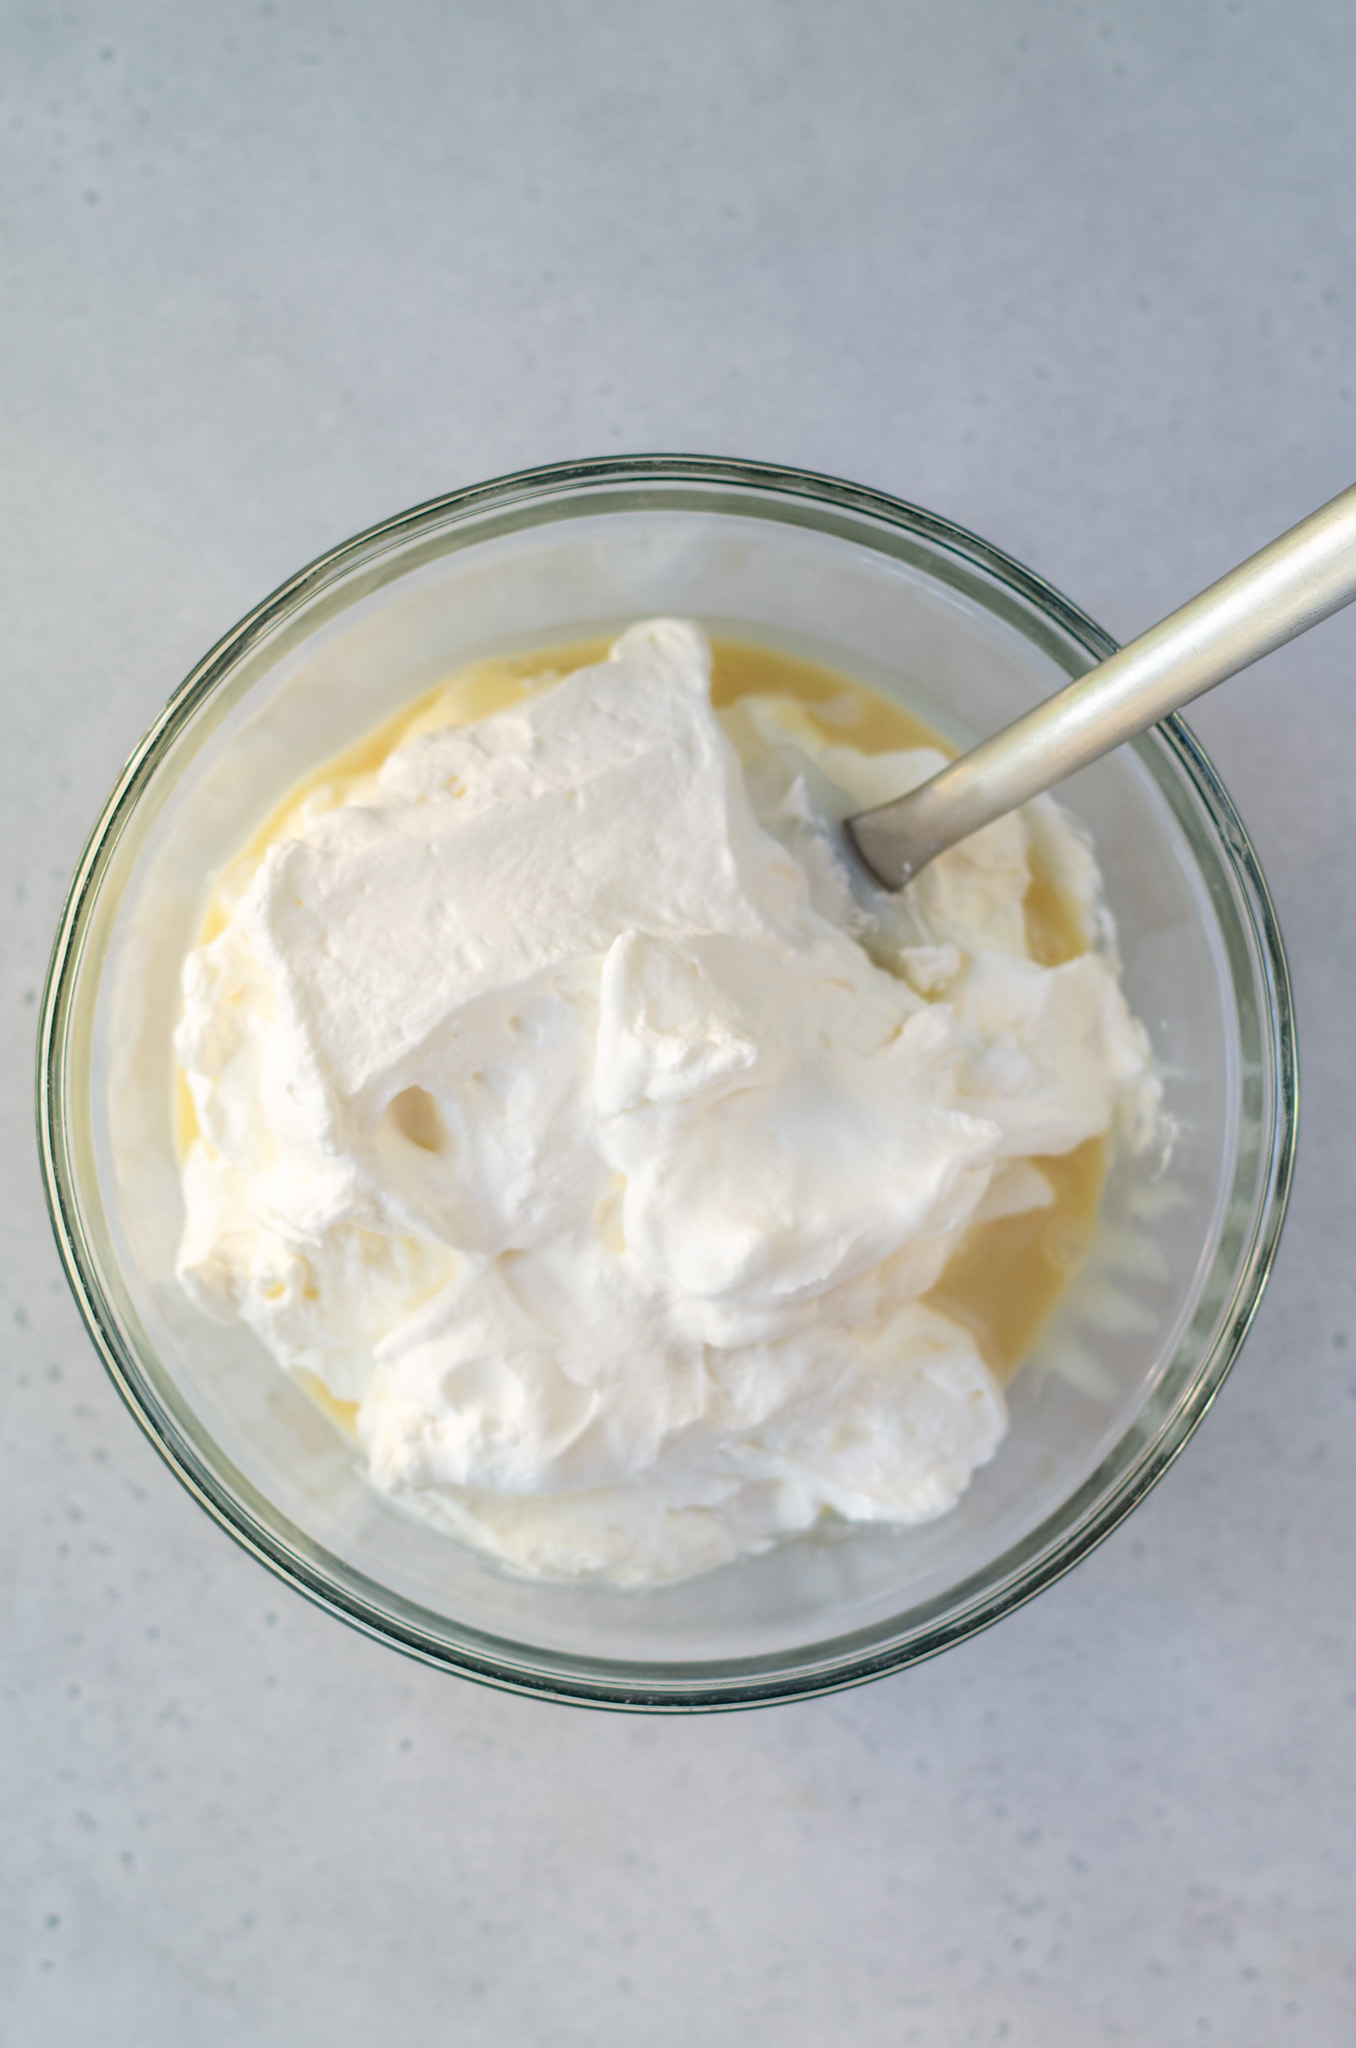 sweetened condensed milk and whipped cream in a bowl